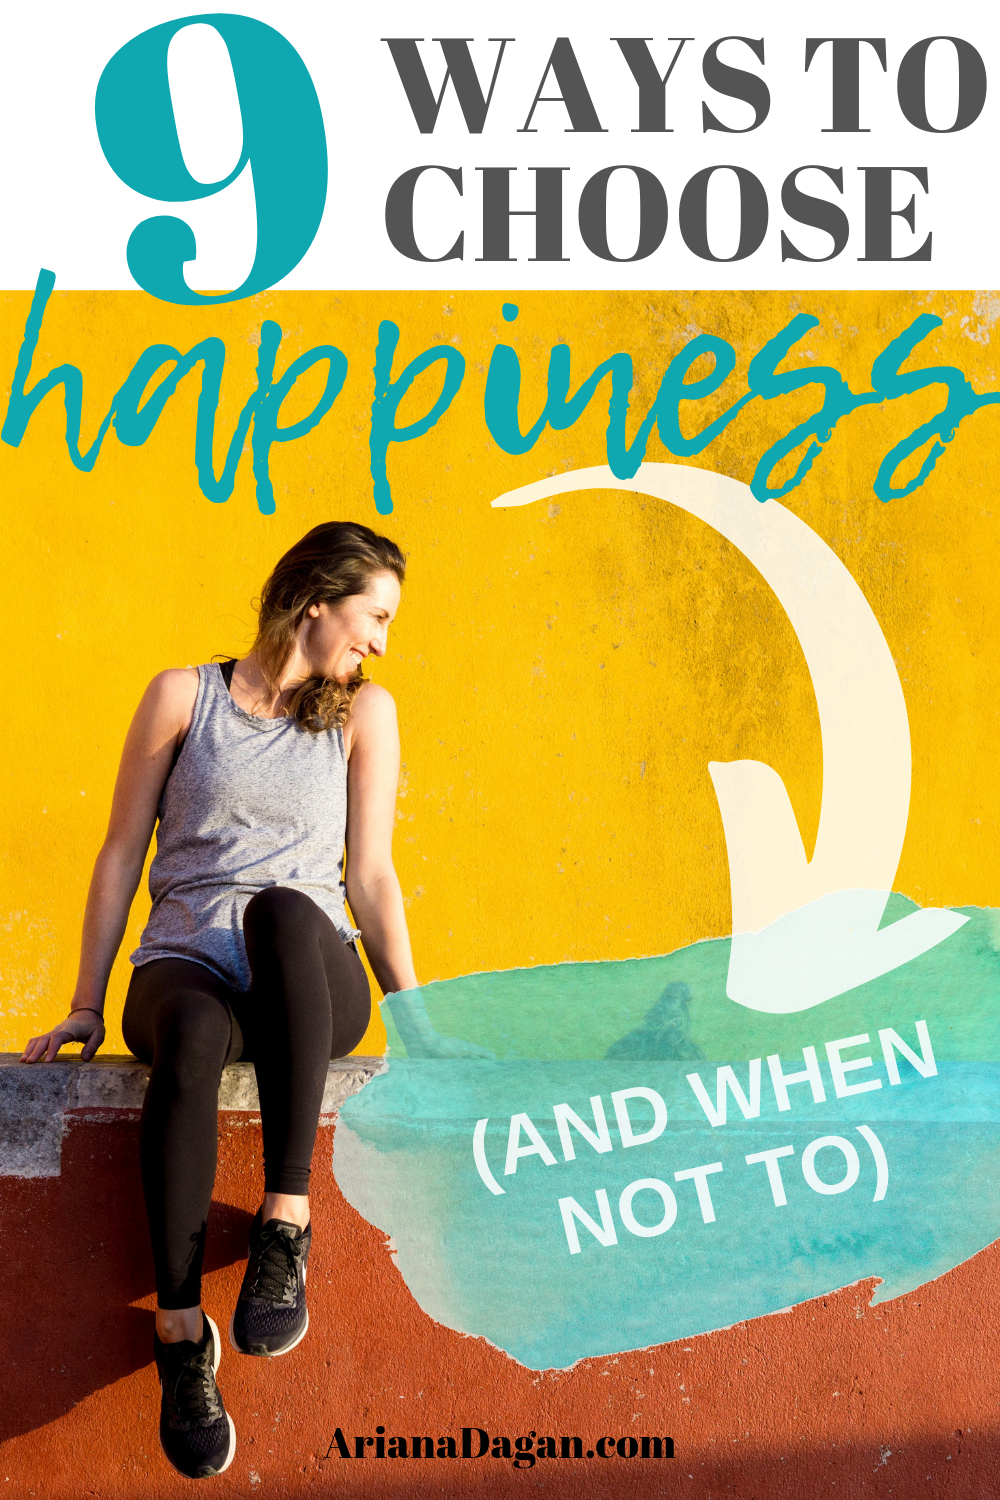 9 Ways to Choose Happiness and when not to by Ariana Dagan